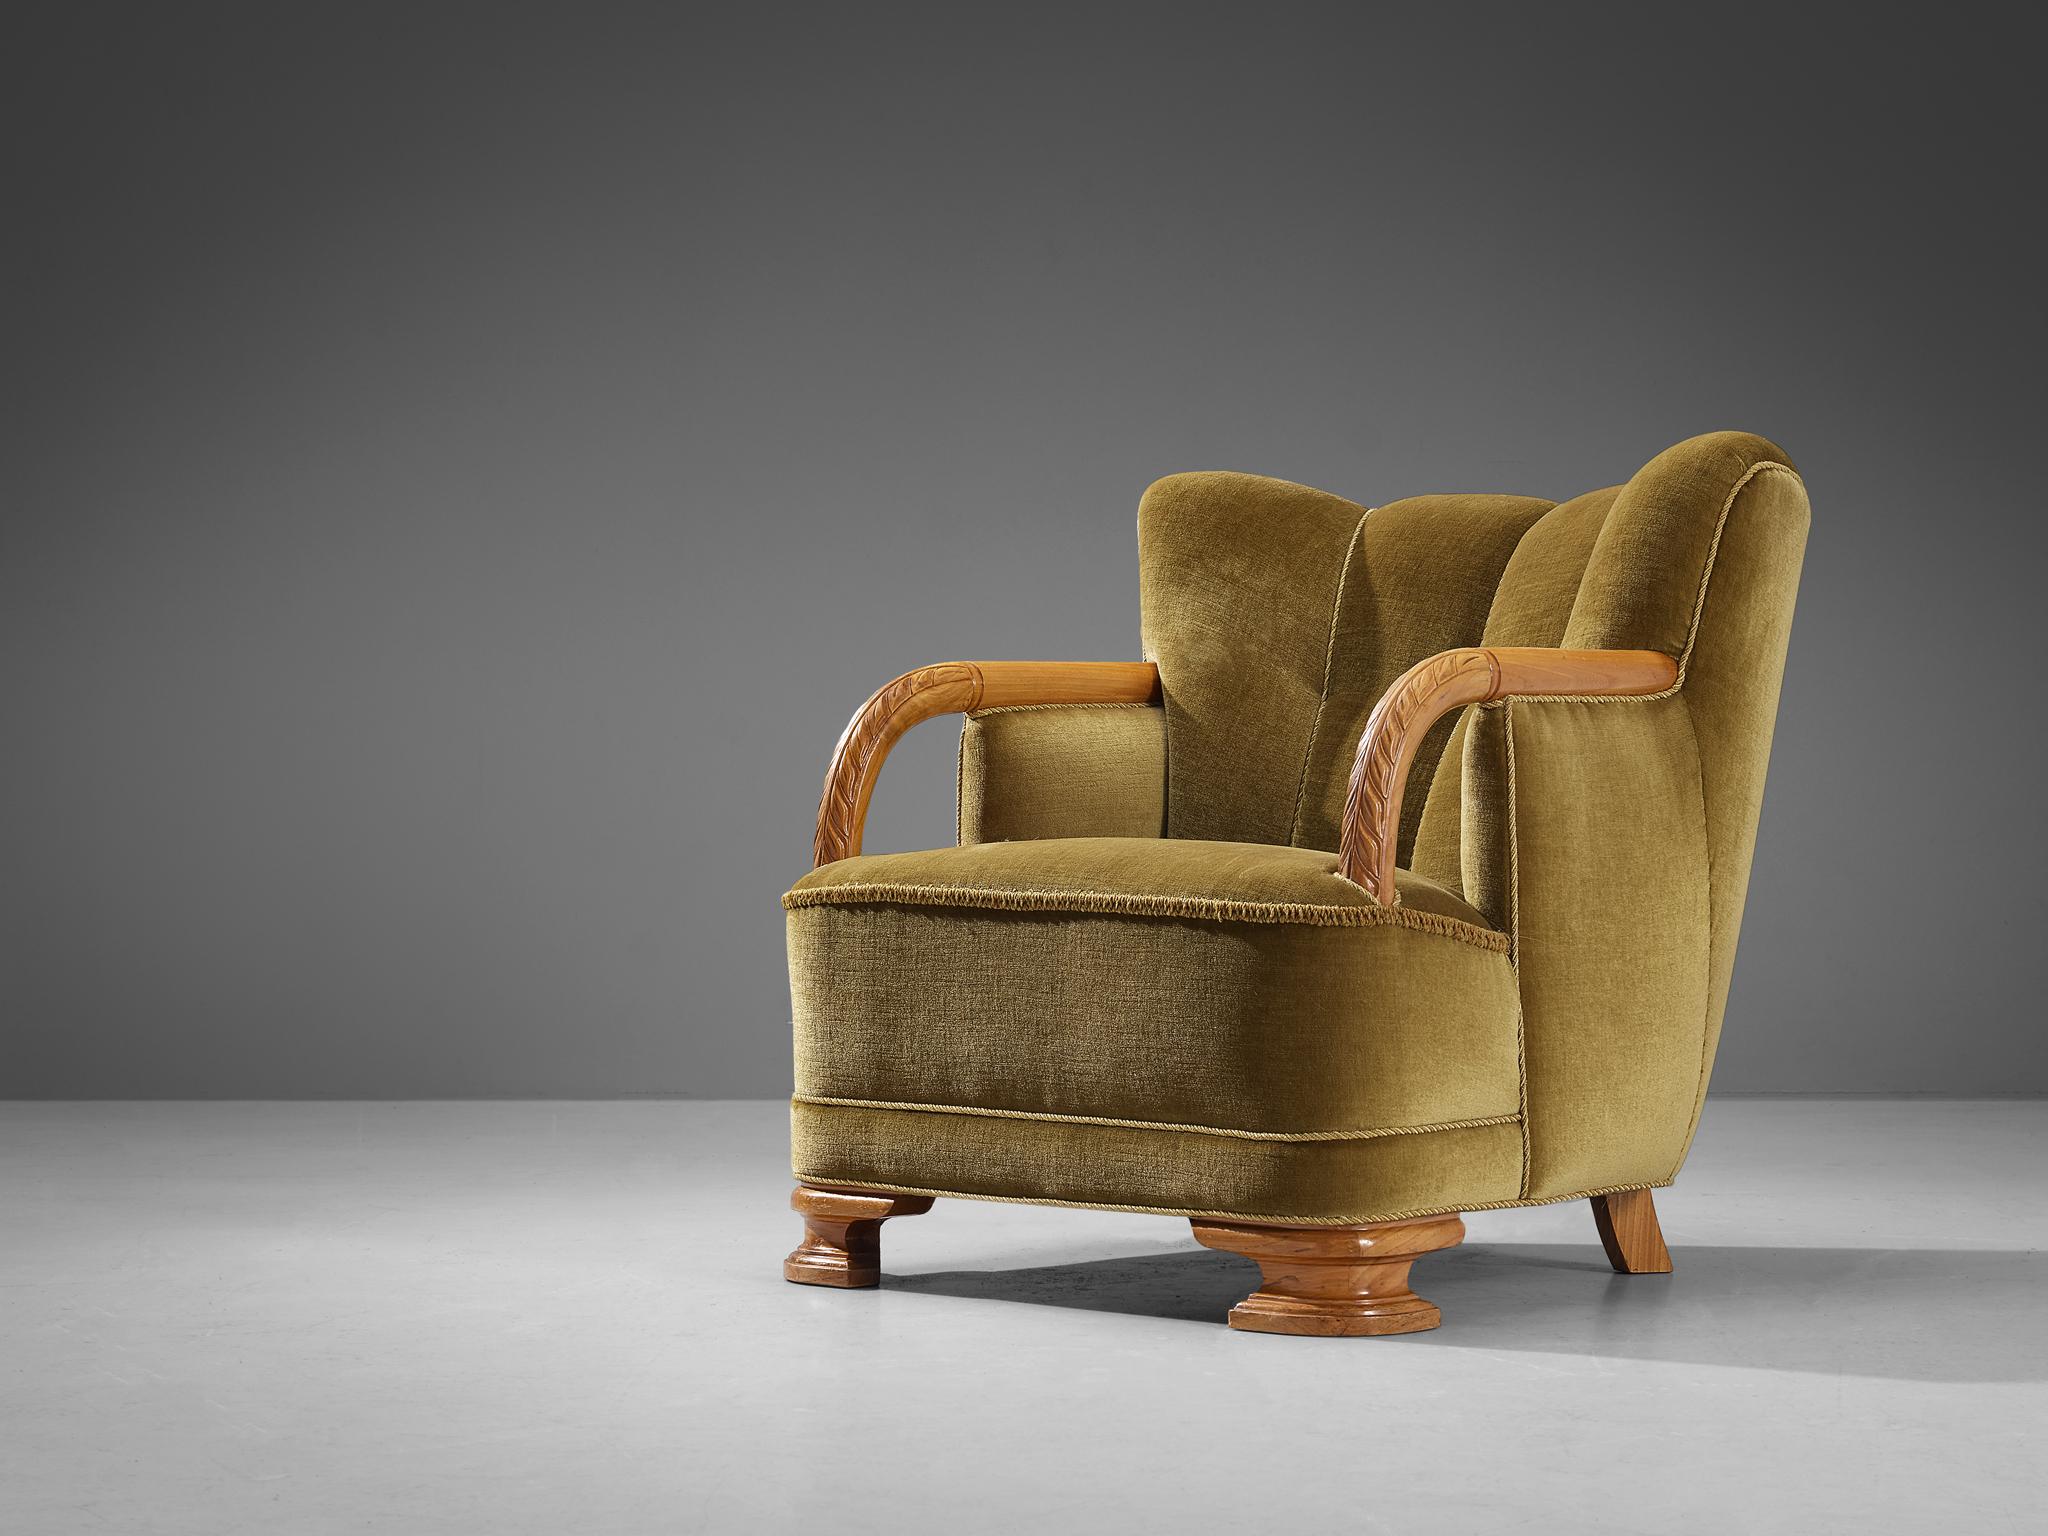 Easy chair, velvet, elm, Denmark, circa. 1940 

This lounge chair of Danish origin comes with an olive green velvet upholstery that beautifully blends in with the warm tone of the wooden frame executed in elm. The design is based on a solid